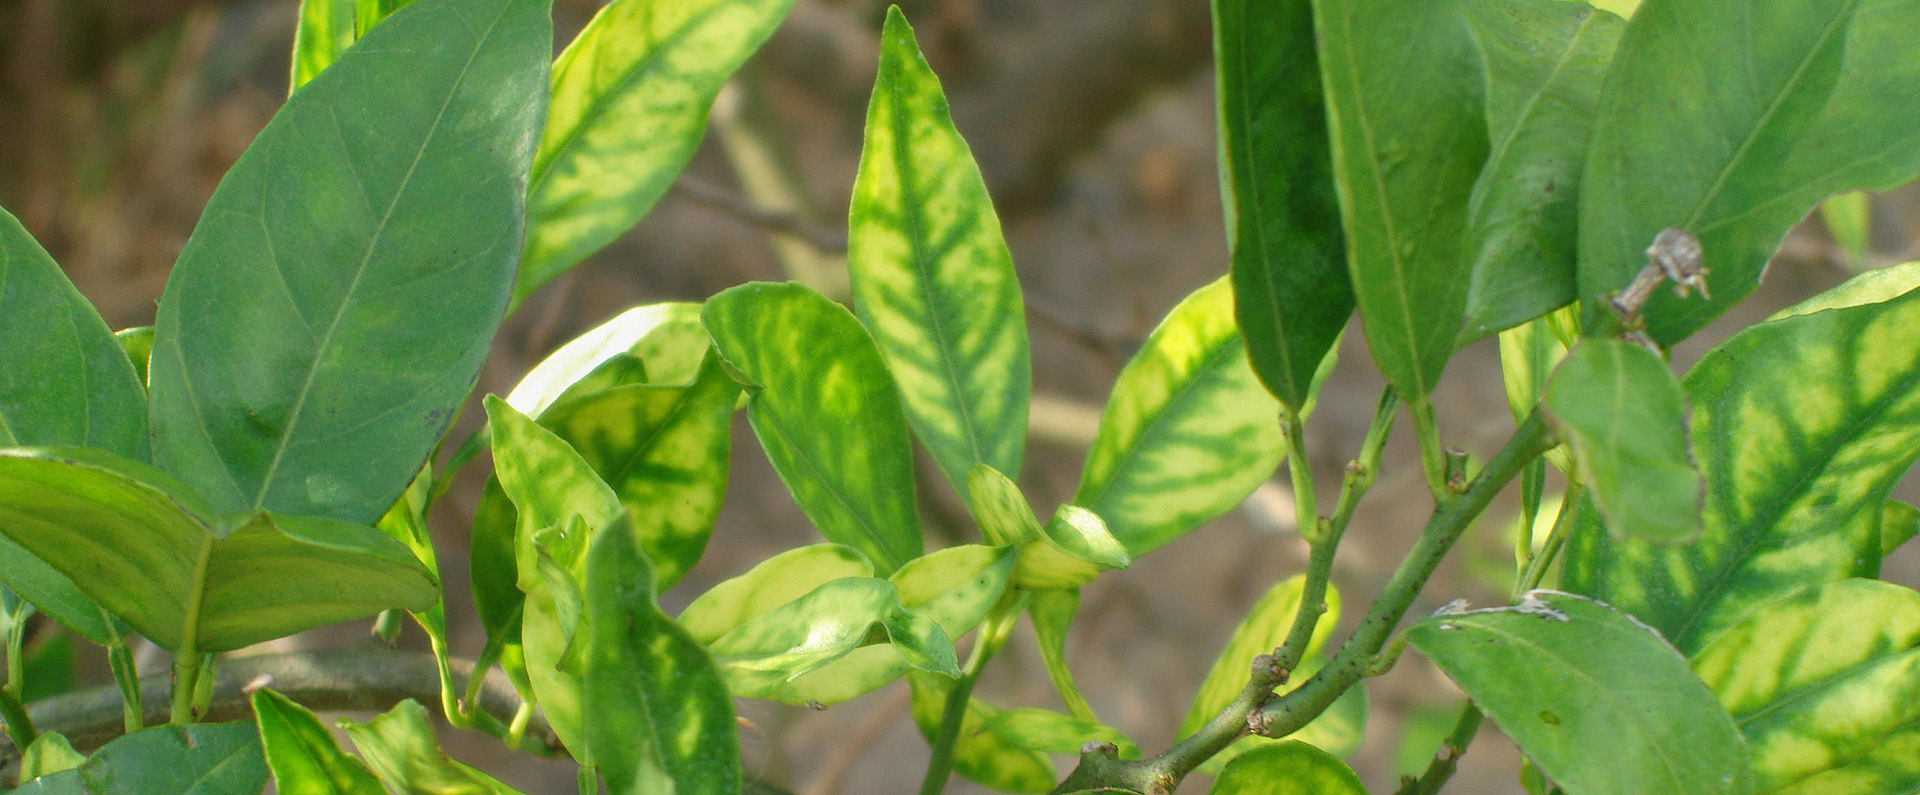 Citrus leaves showing signing of yellowing from citrus greening disease